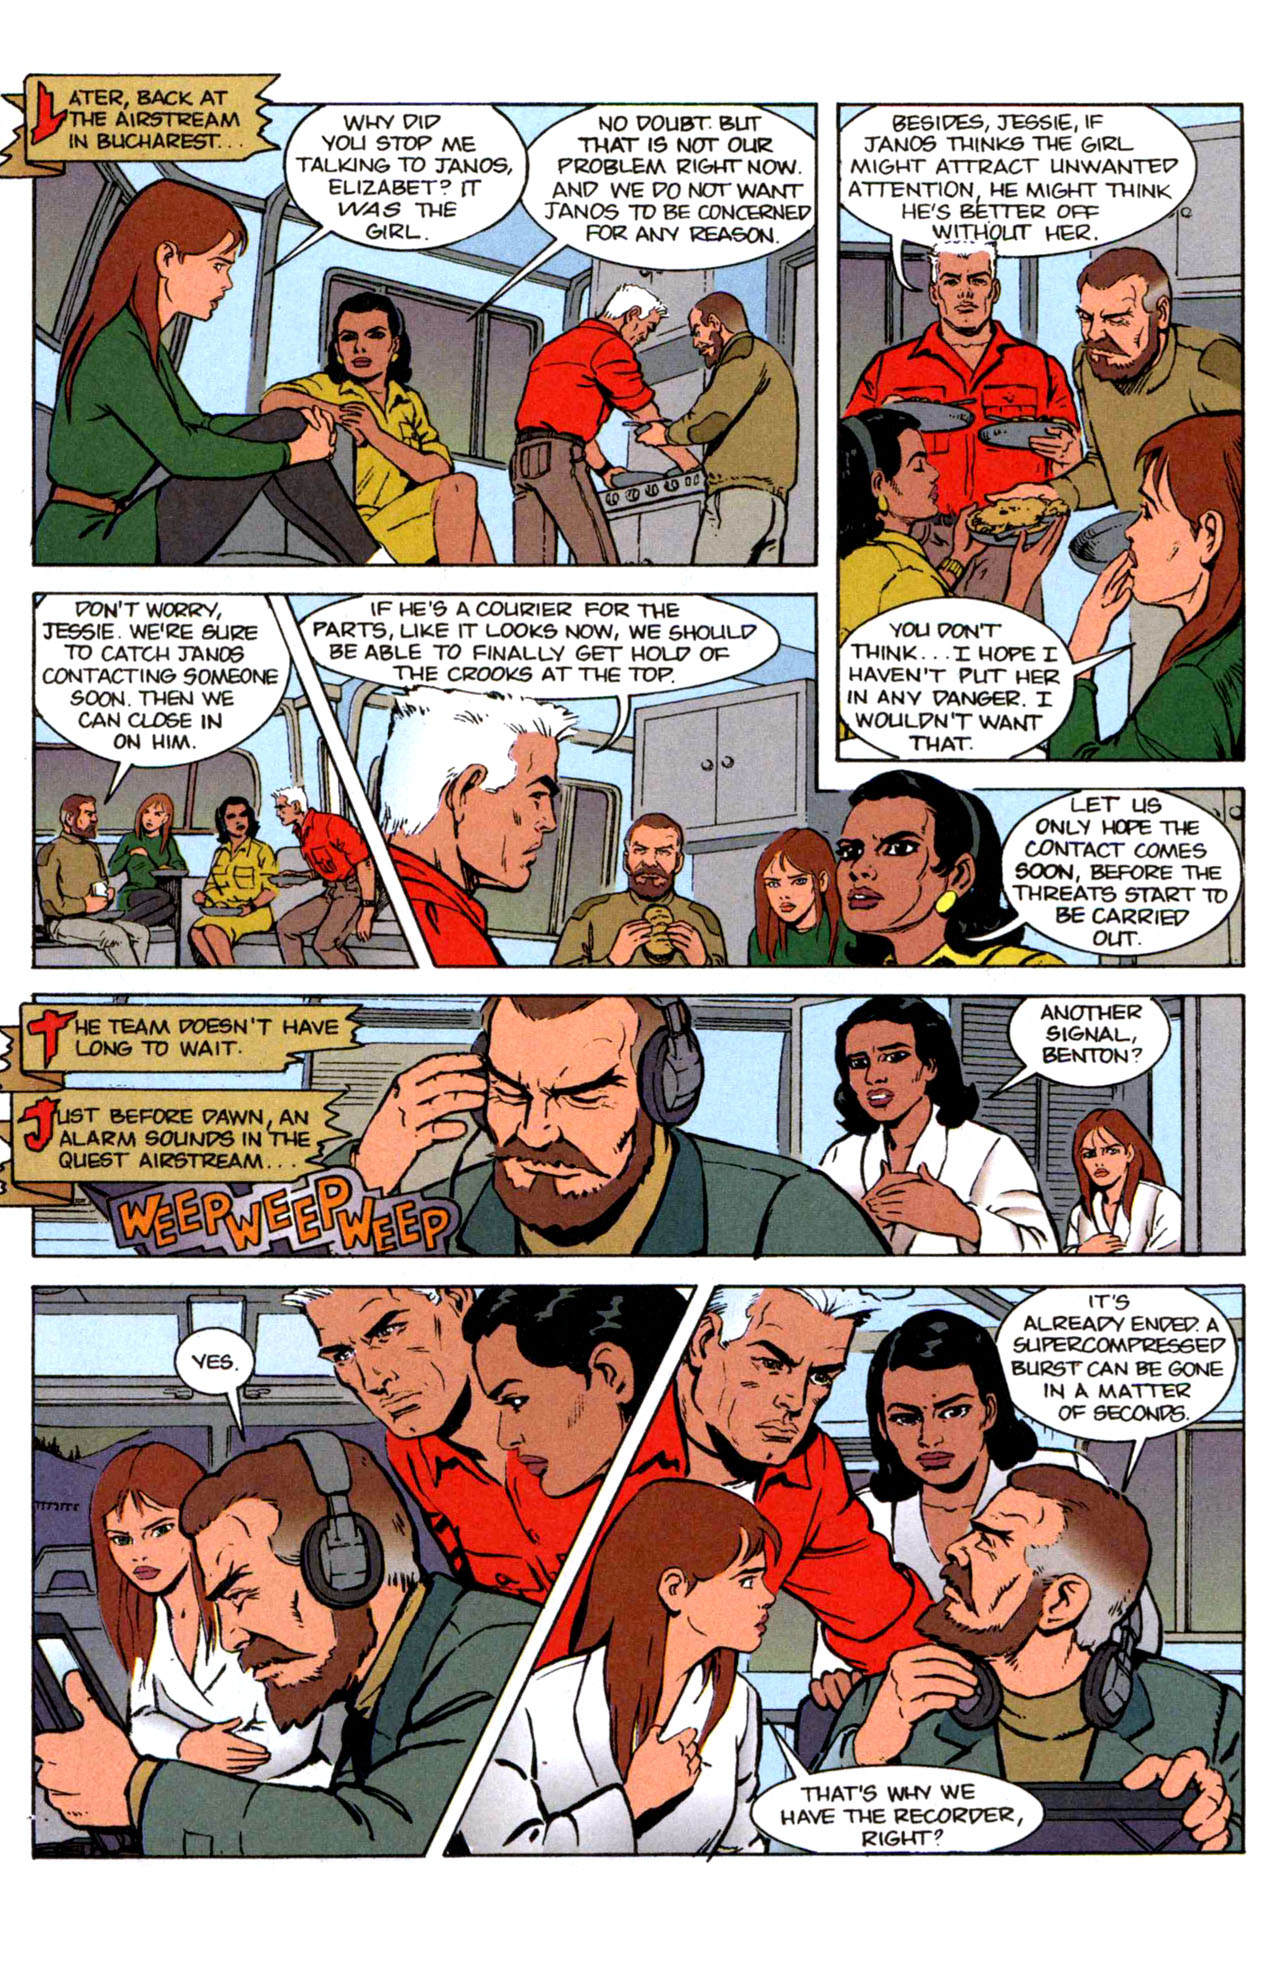 Jonny Quest Porn - The Real Adventures Of Jonny Quest 02 | Read The Real Adventures Of Jonny  Quest 02 comic online in high quality. Read Full Comic online for free -  Read comics online in